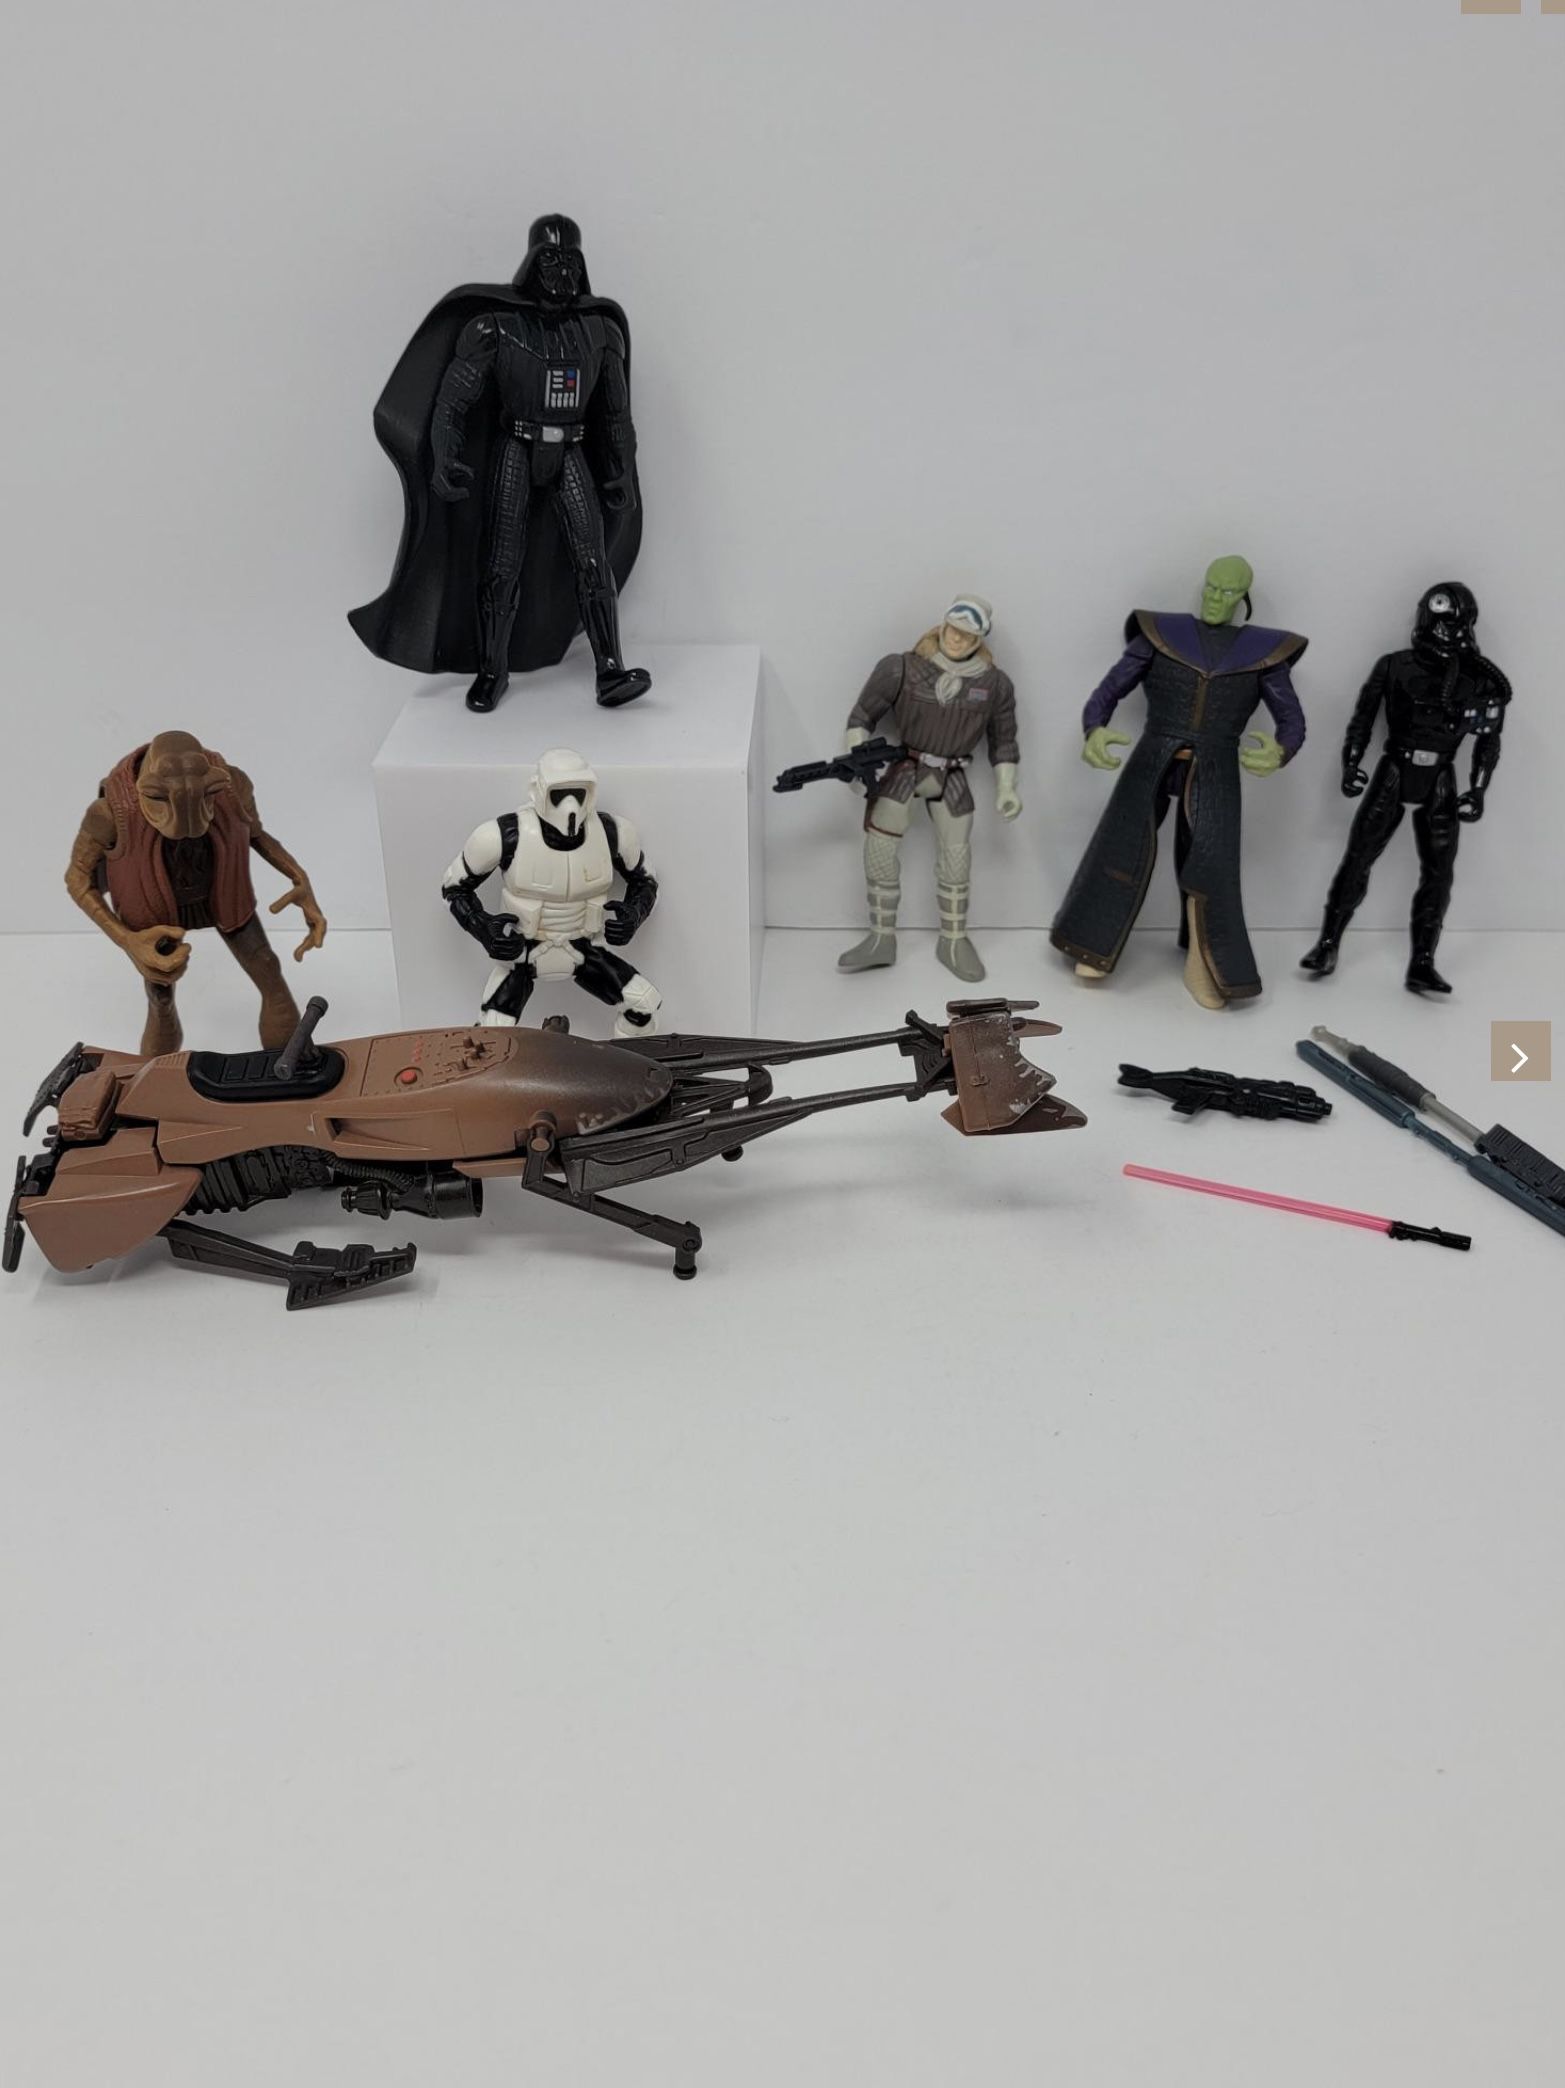 Vintage Kenner/Tonka 1990's Star Wars Action Figures, Vehicles and Weapons In Great Condition!